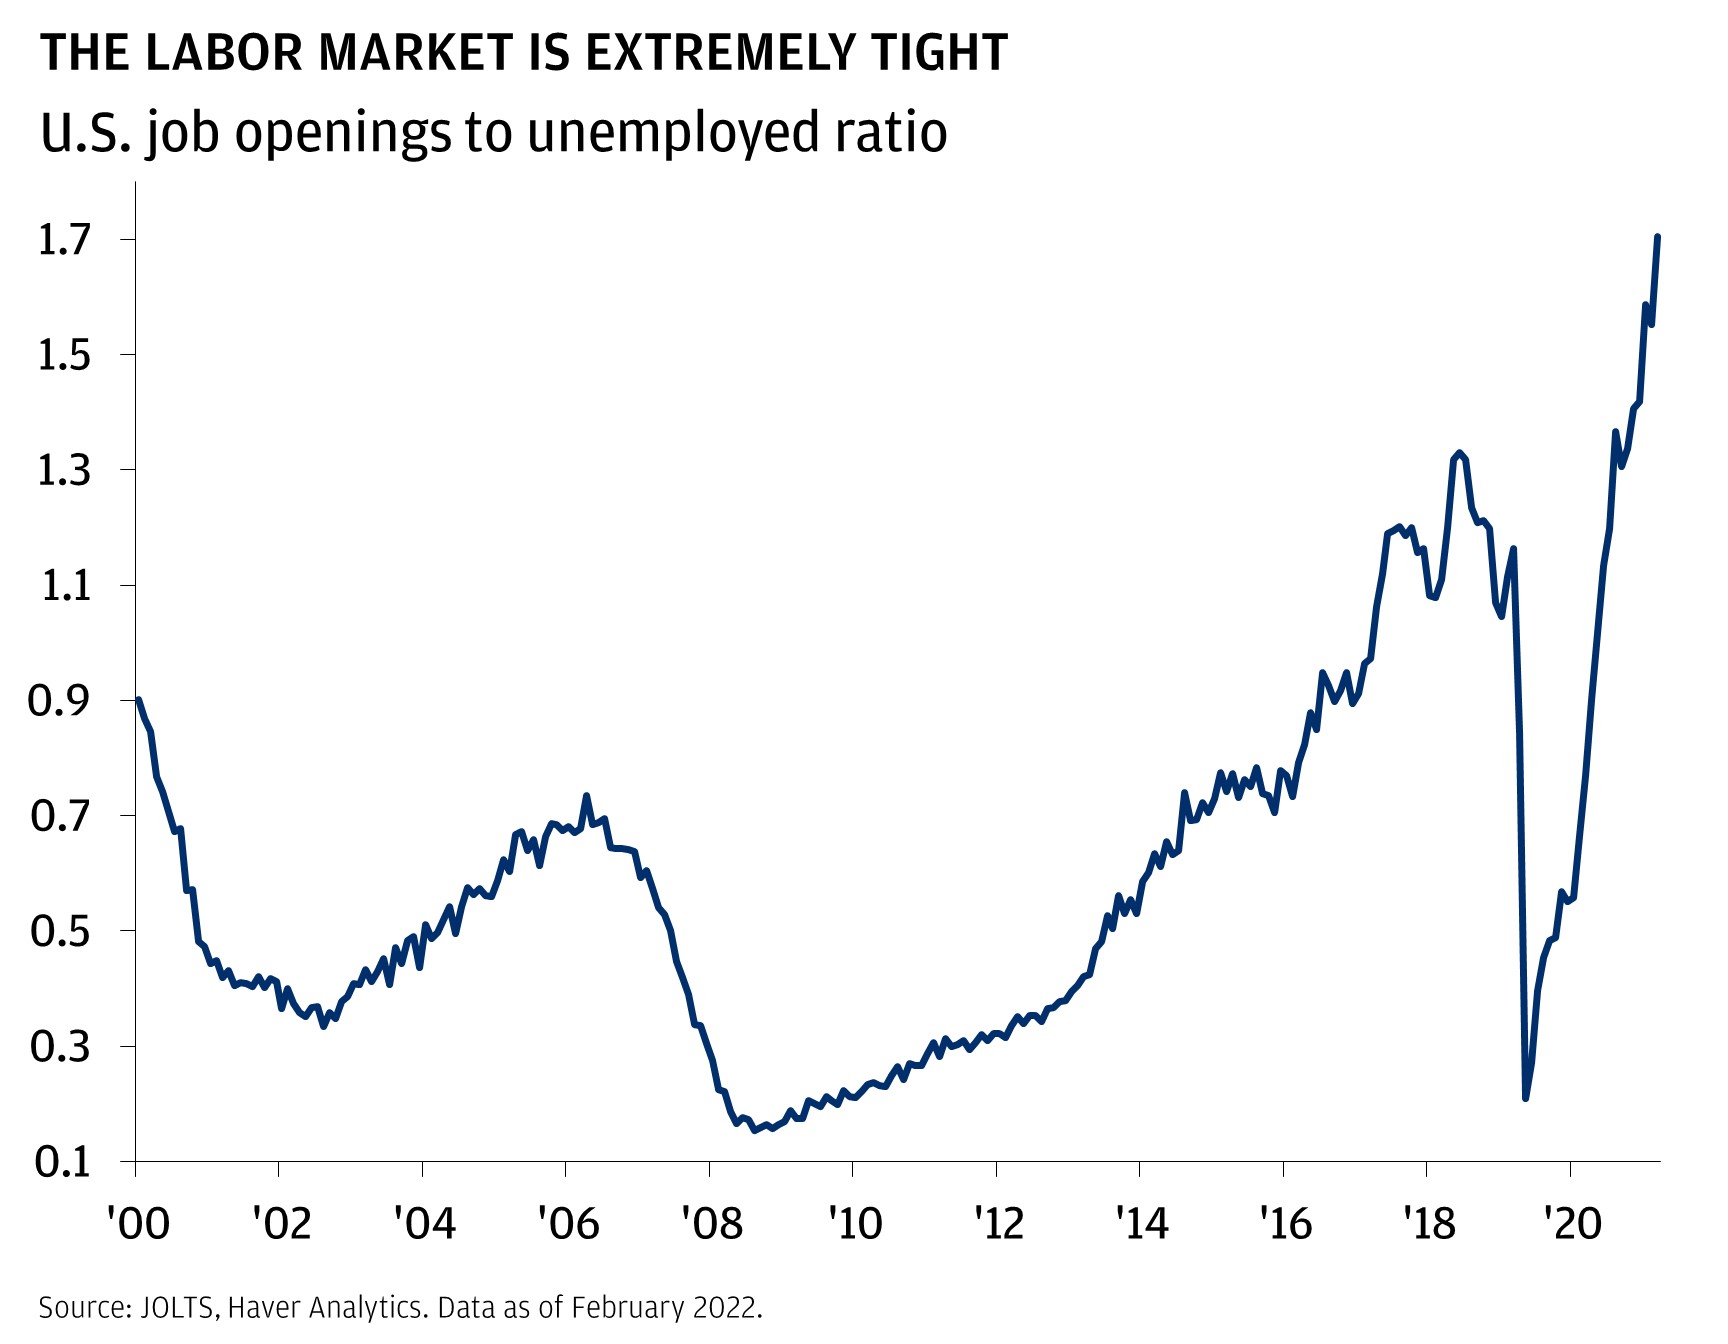 The labor market is extremely tight